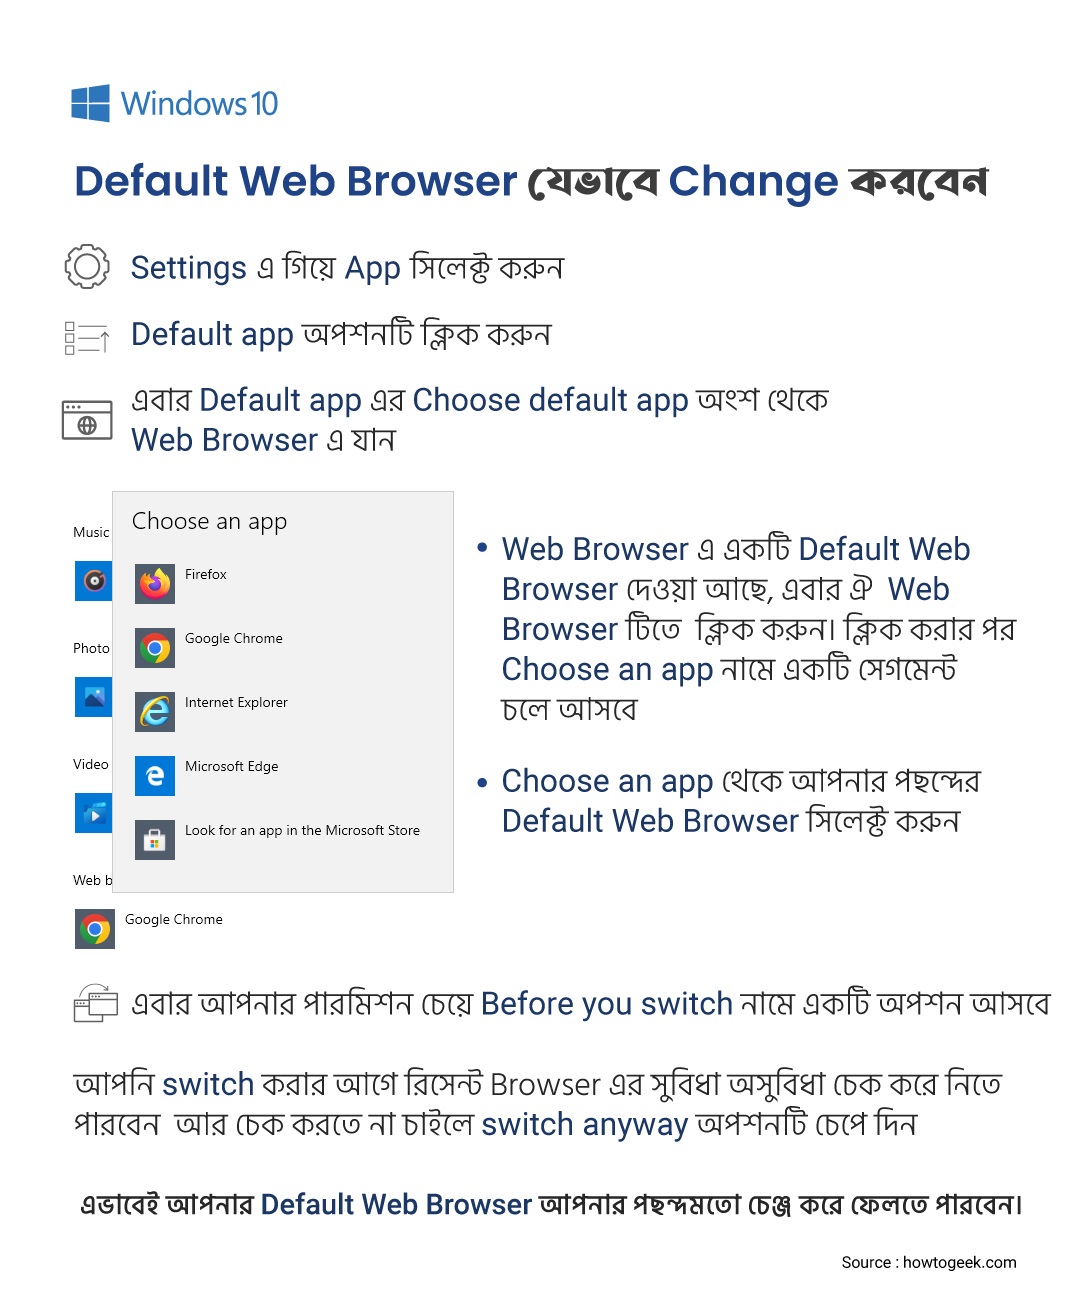 How to change default browser android, how to change default browser in mobile phone, how to change default browser windows 10, how to change default browser in chrome, how to change default browser windows 11, how to change your default browser on mac, how to change default browser iphone, how to change default browser windows 7,